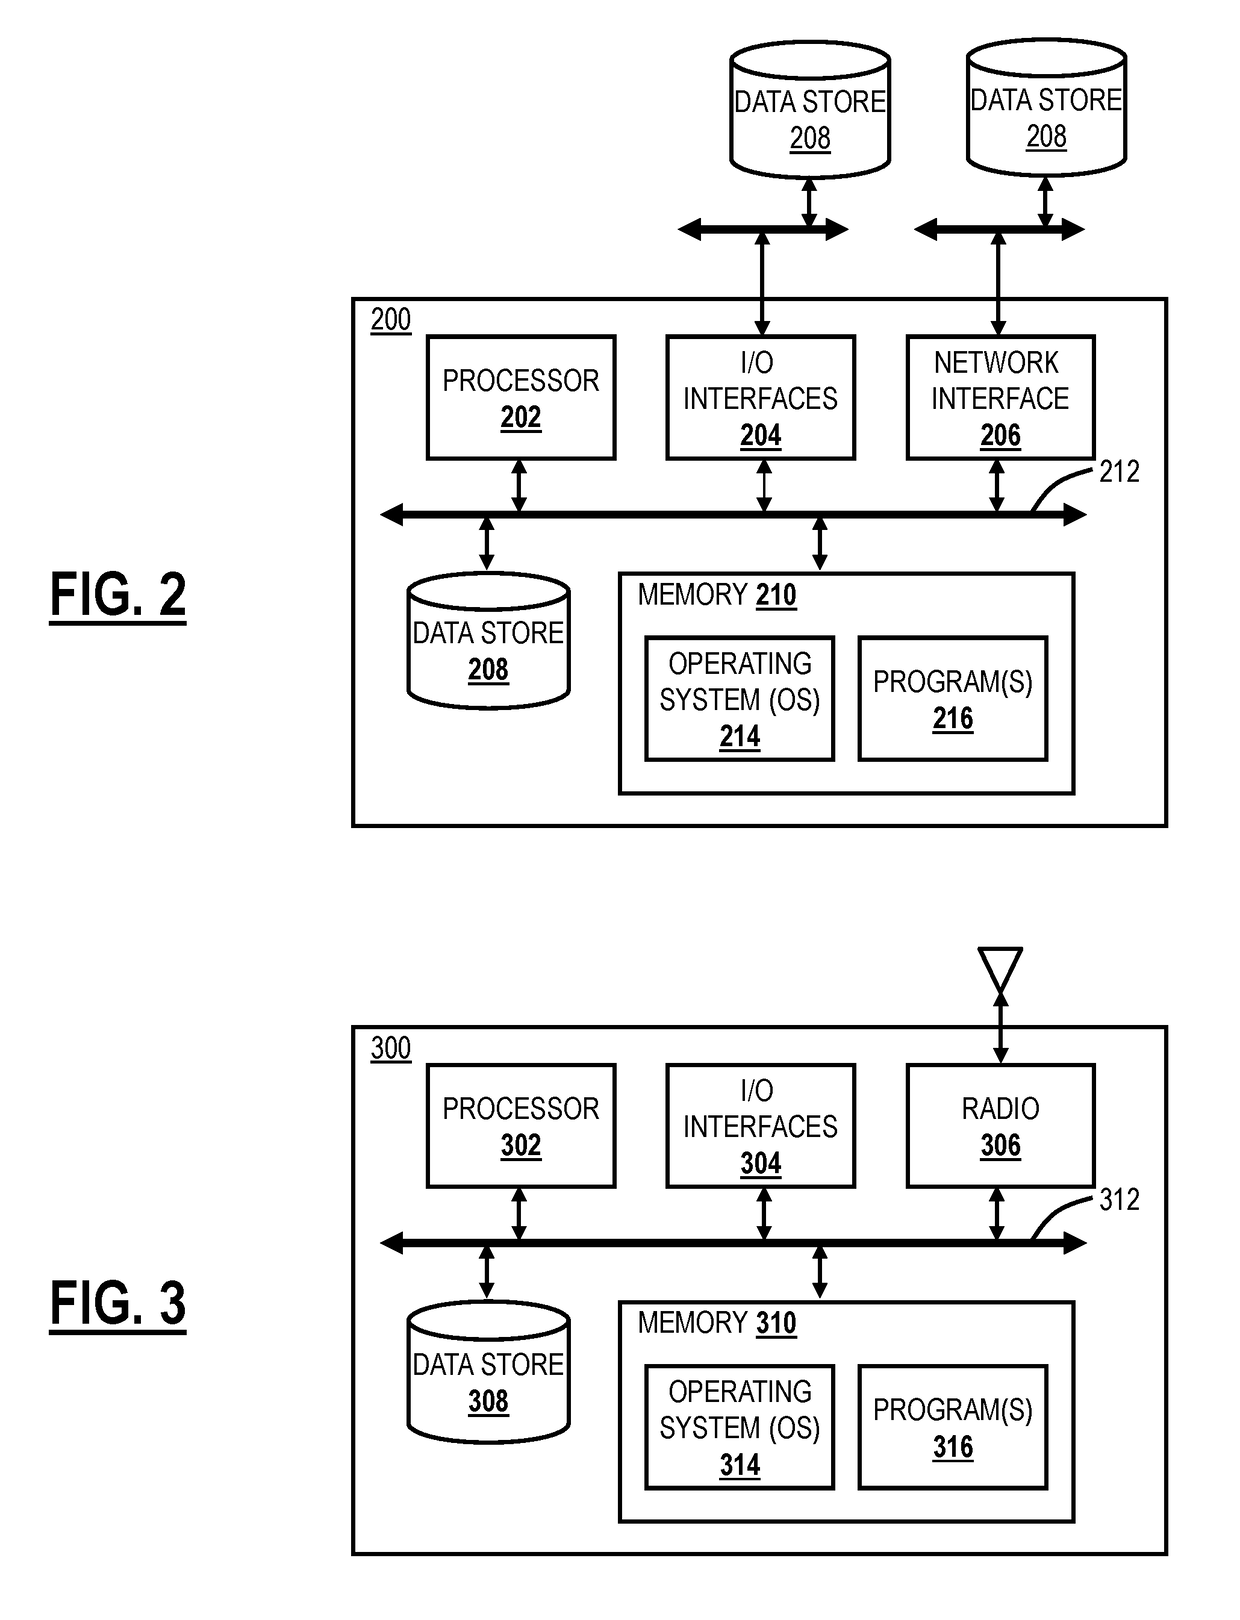 Systems and methods for network vulnerability assessment and protection of wi-fi networks using a cloud-based security system